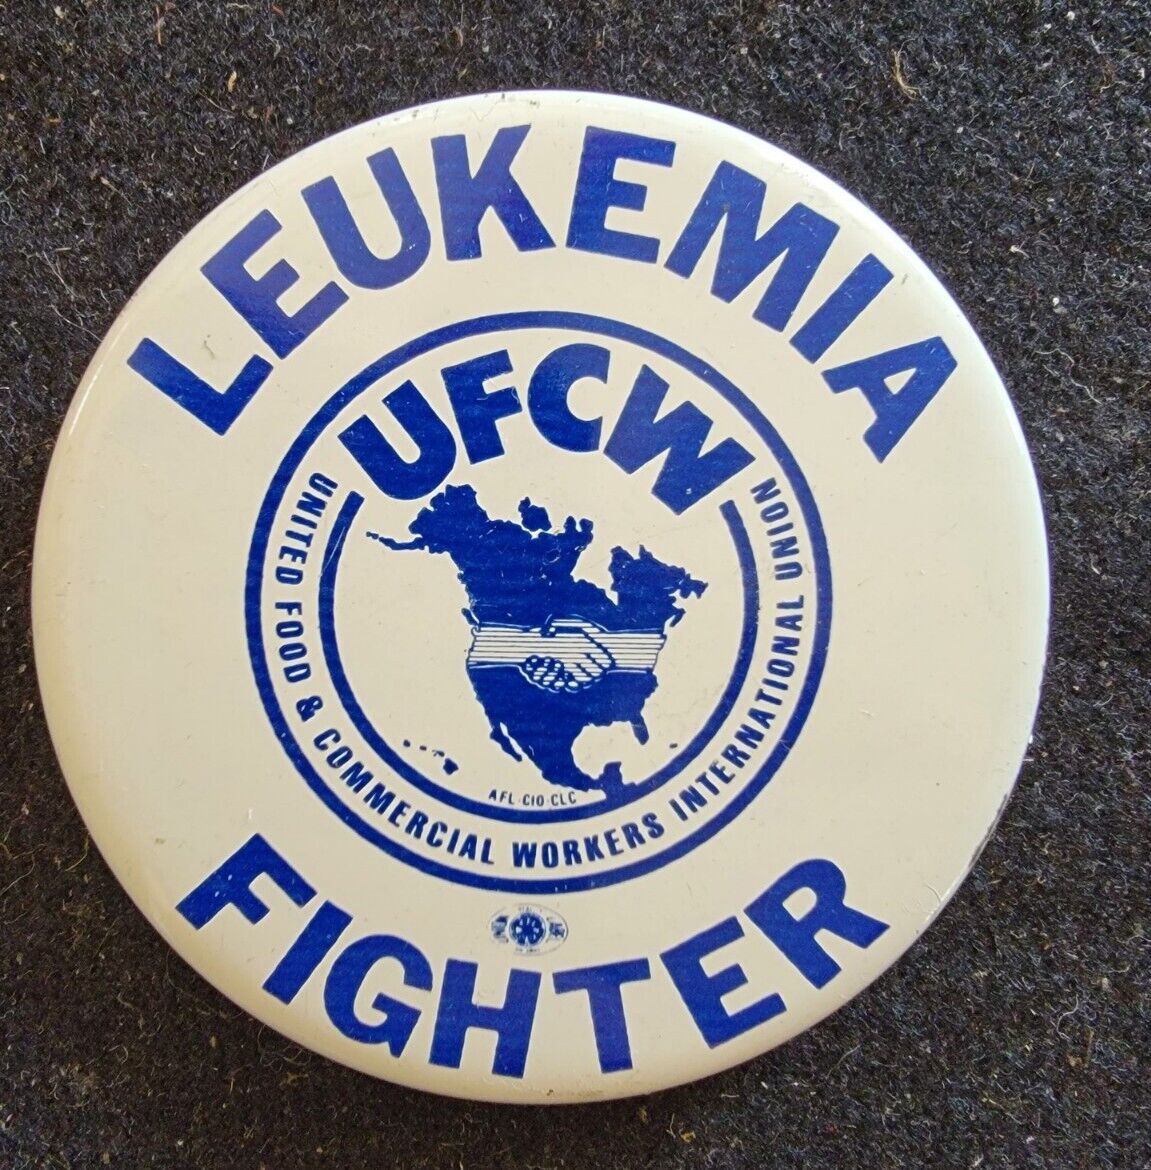 LEUKEMIA FIGHTER UFCW United Food & Commercial Workers Union Pin Pinback Button